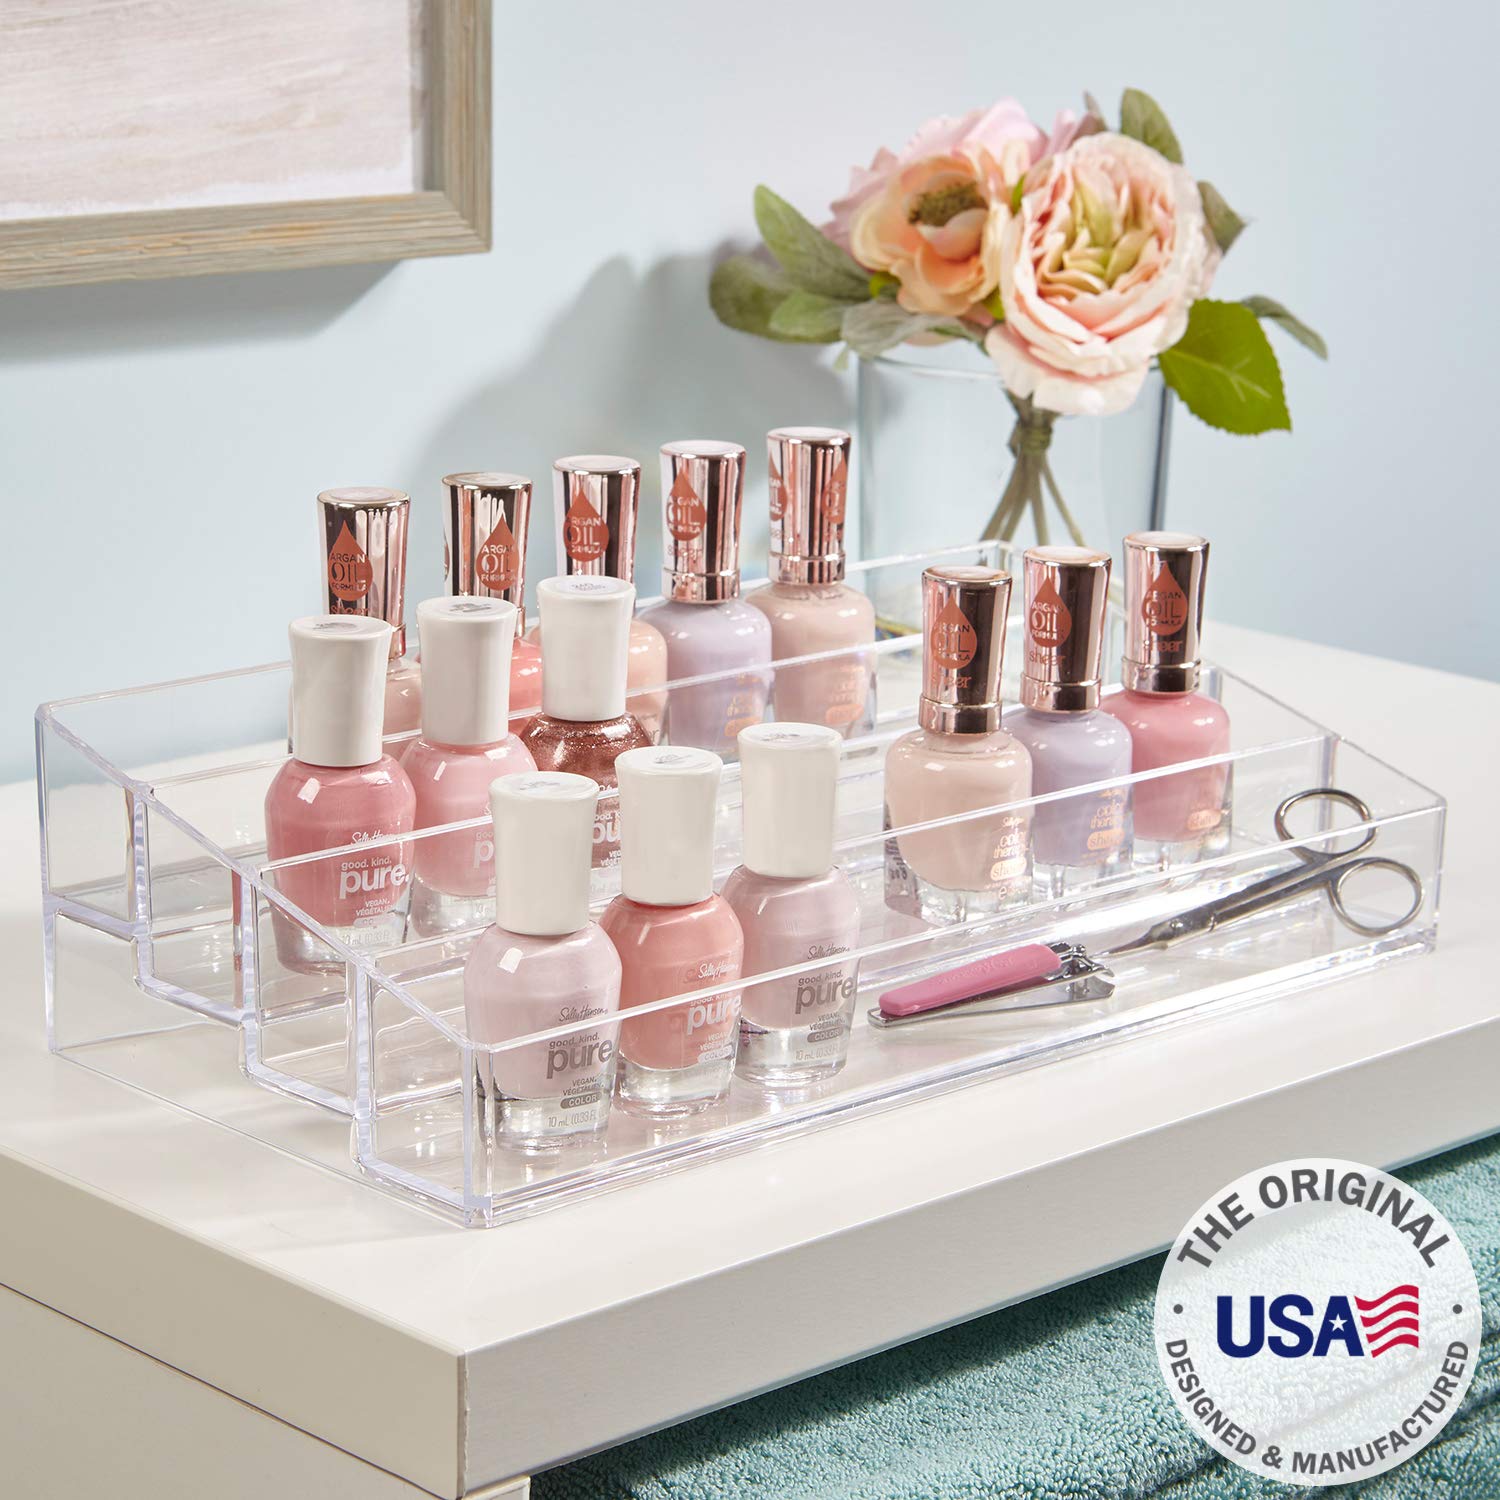 STORi Clear Plastic Multi-Level Vanity Organizer | Rectangular 4-Tier Holder for Makeup, Eyeshadow Palettes, & up to 40 Nail Polish Bottles | Made in USA